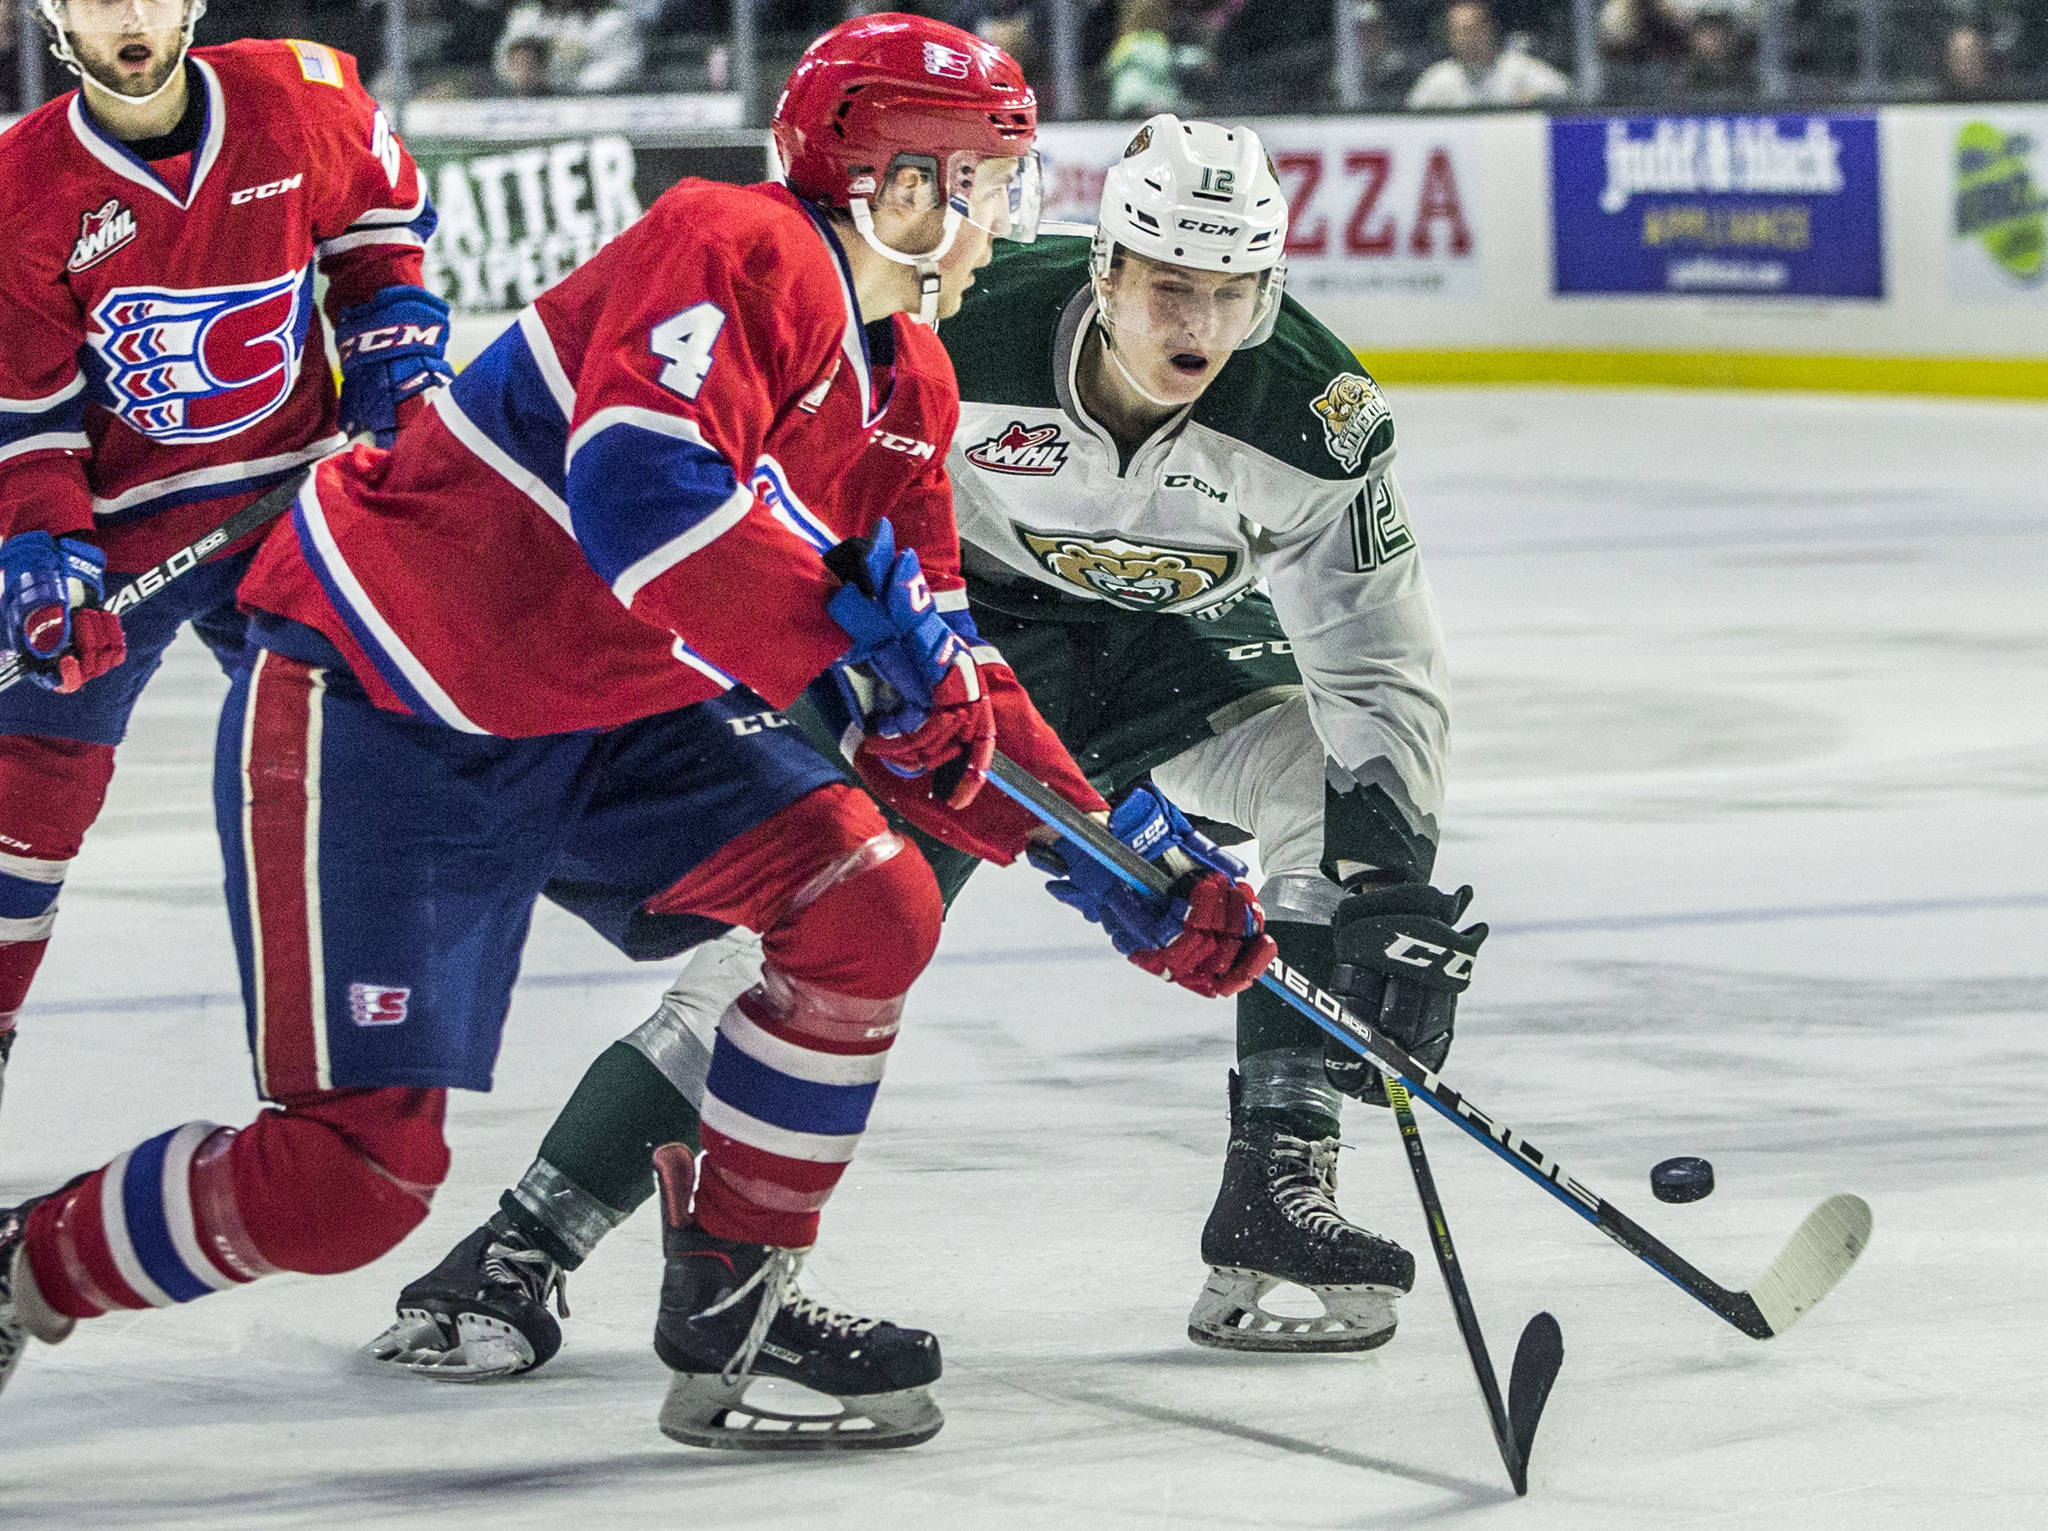 Silvertips takeaways: Special teams woes continue in Game 2